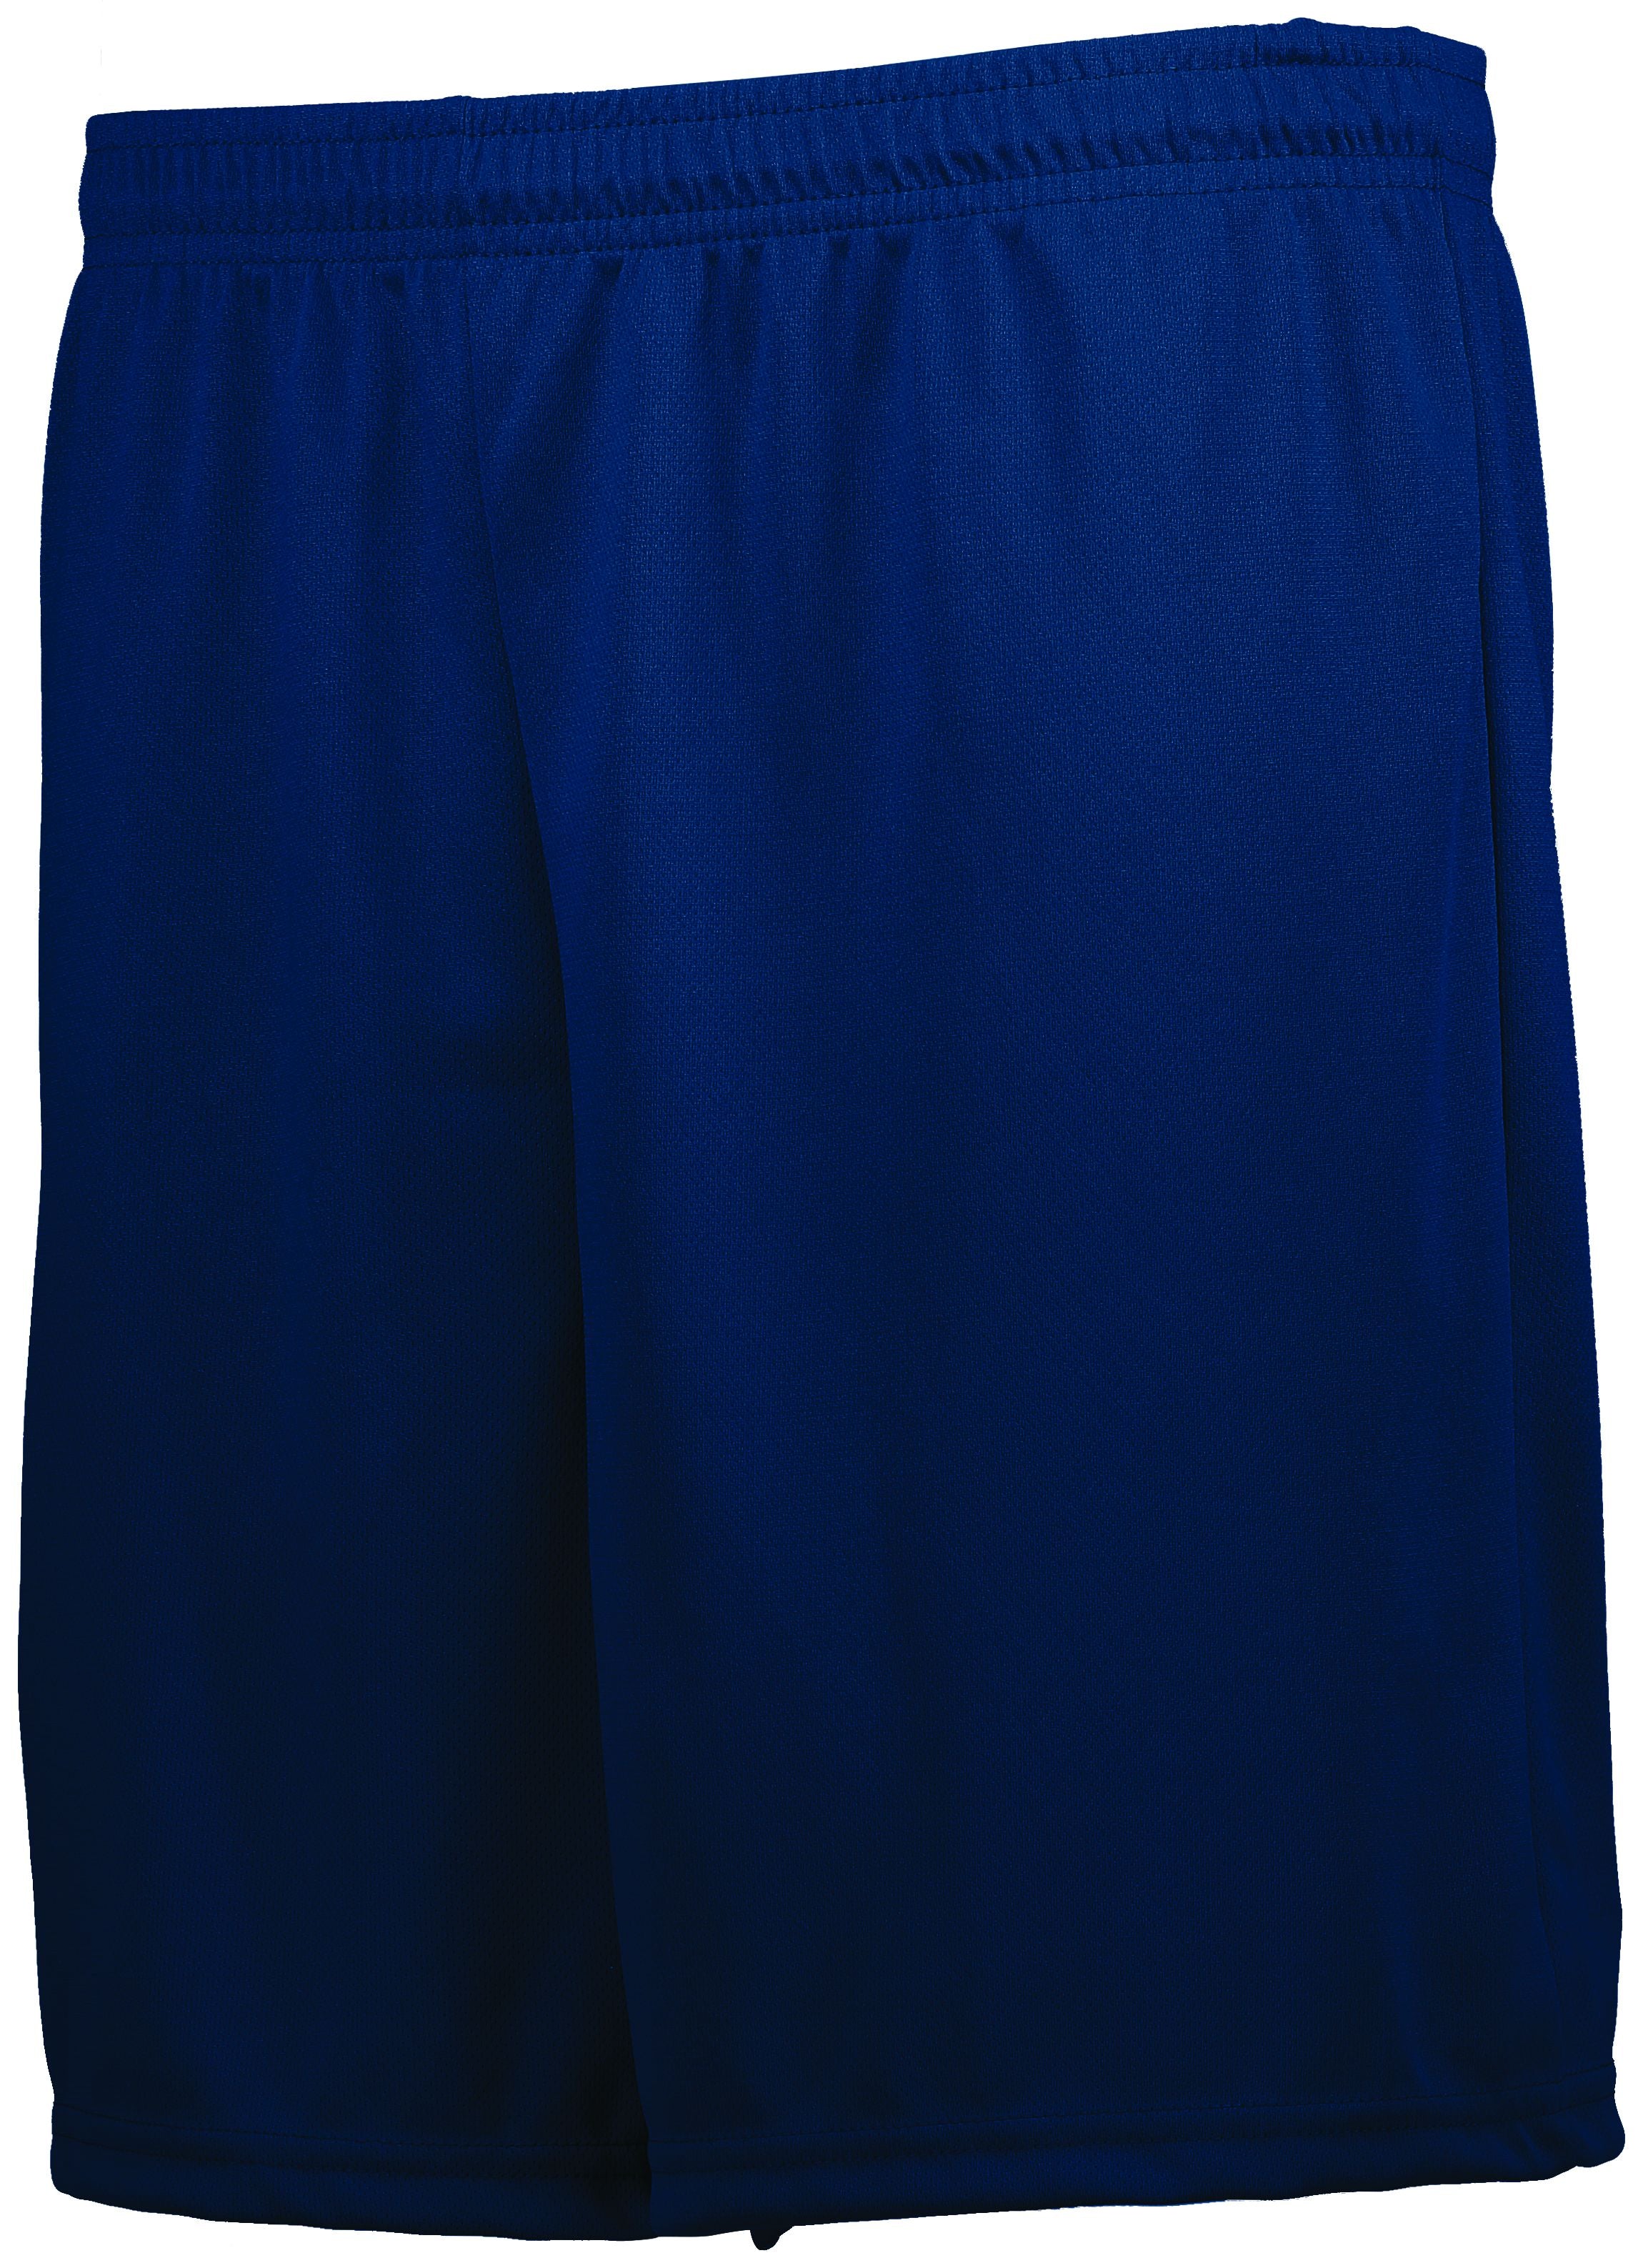 High 5 Youth Prevail Shorts in Navy  -Part of the Youth, Youth-Shorts, High5-Products, Soccer, All-Sports-1 product lines at KanaleyCreations.com